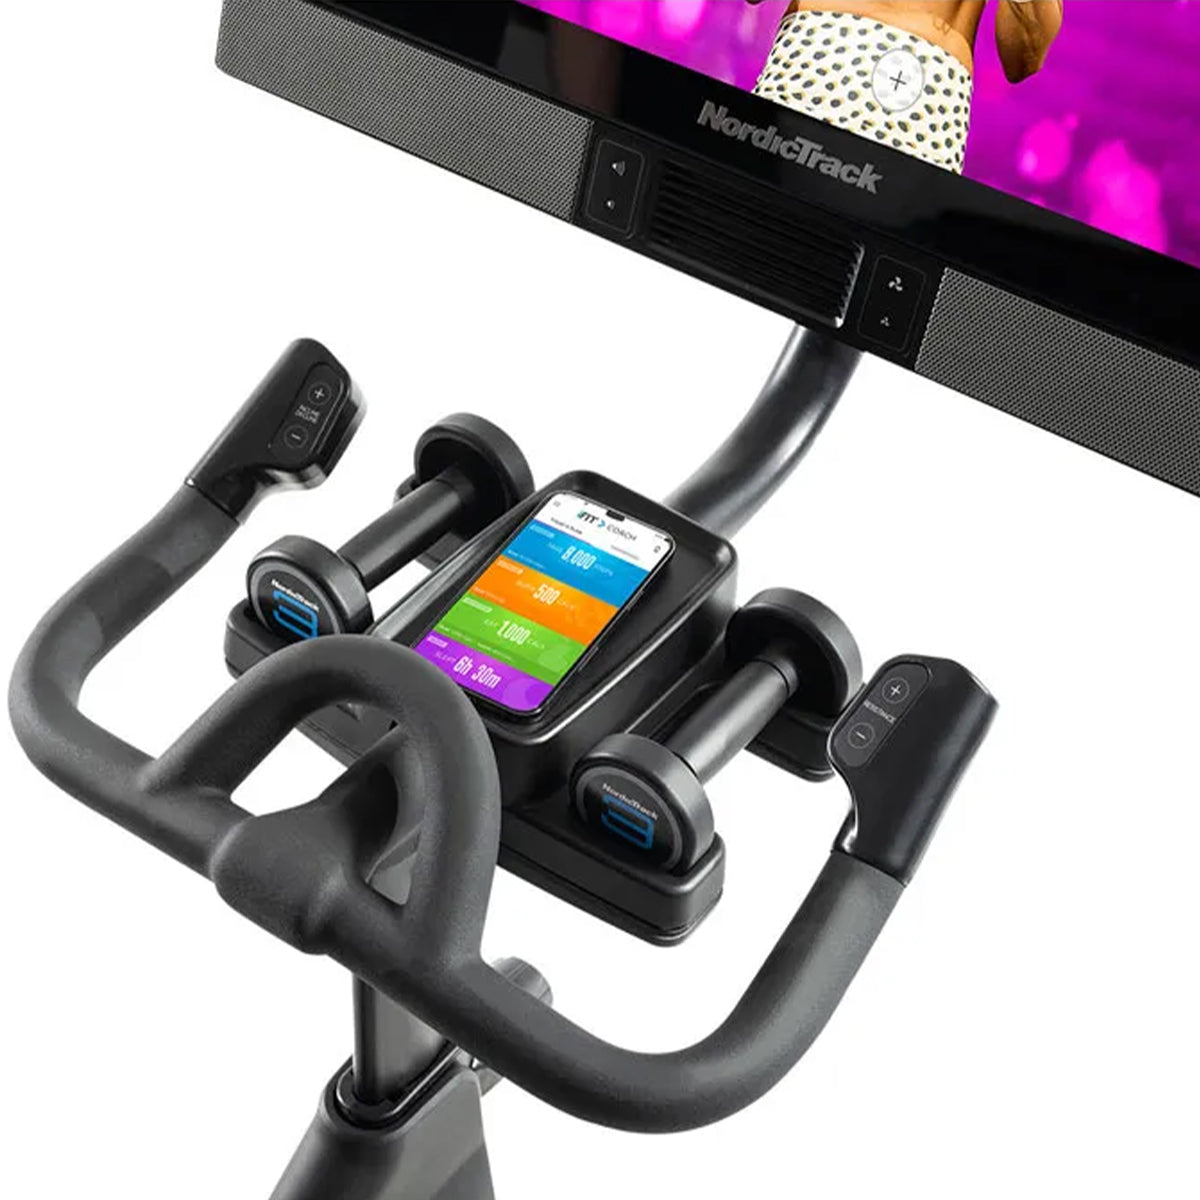 NordicTrack Commercial S27i Studio Cycle